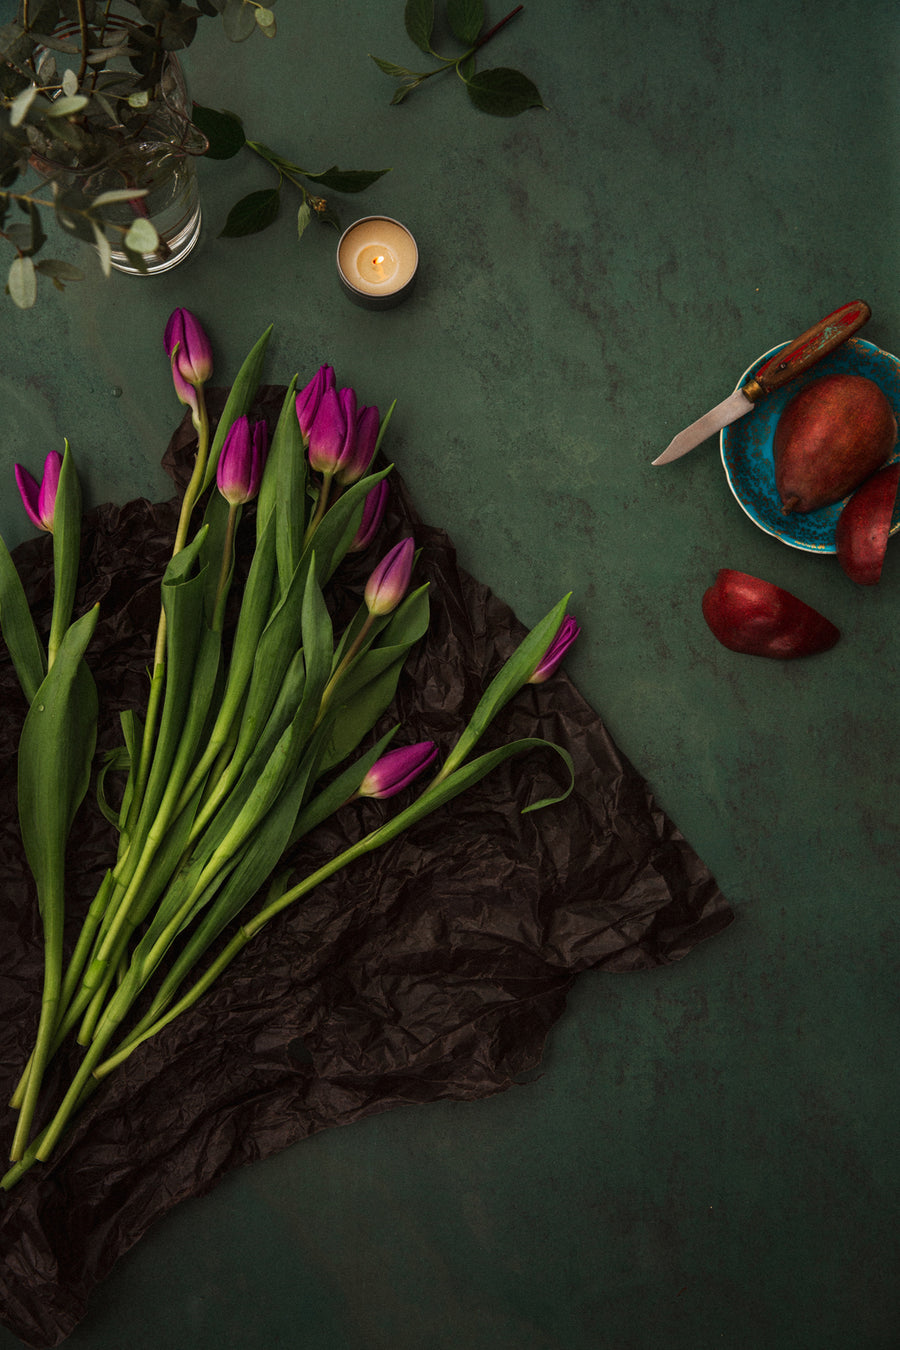 Luca Food & Product Green Photography Background with tulips and pear slices